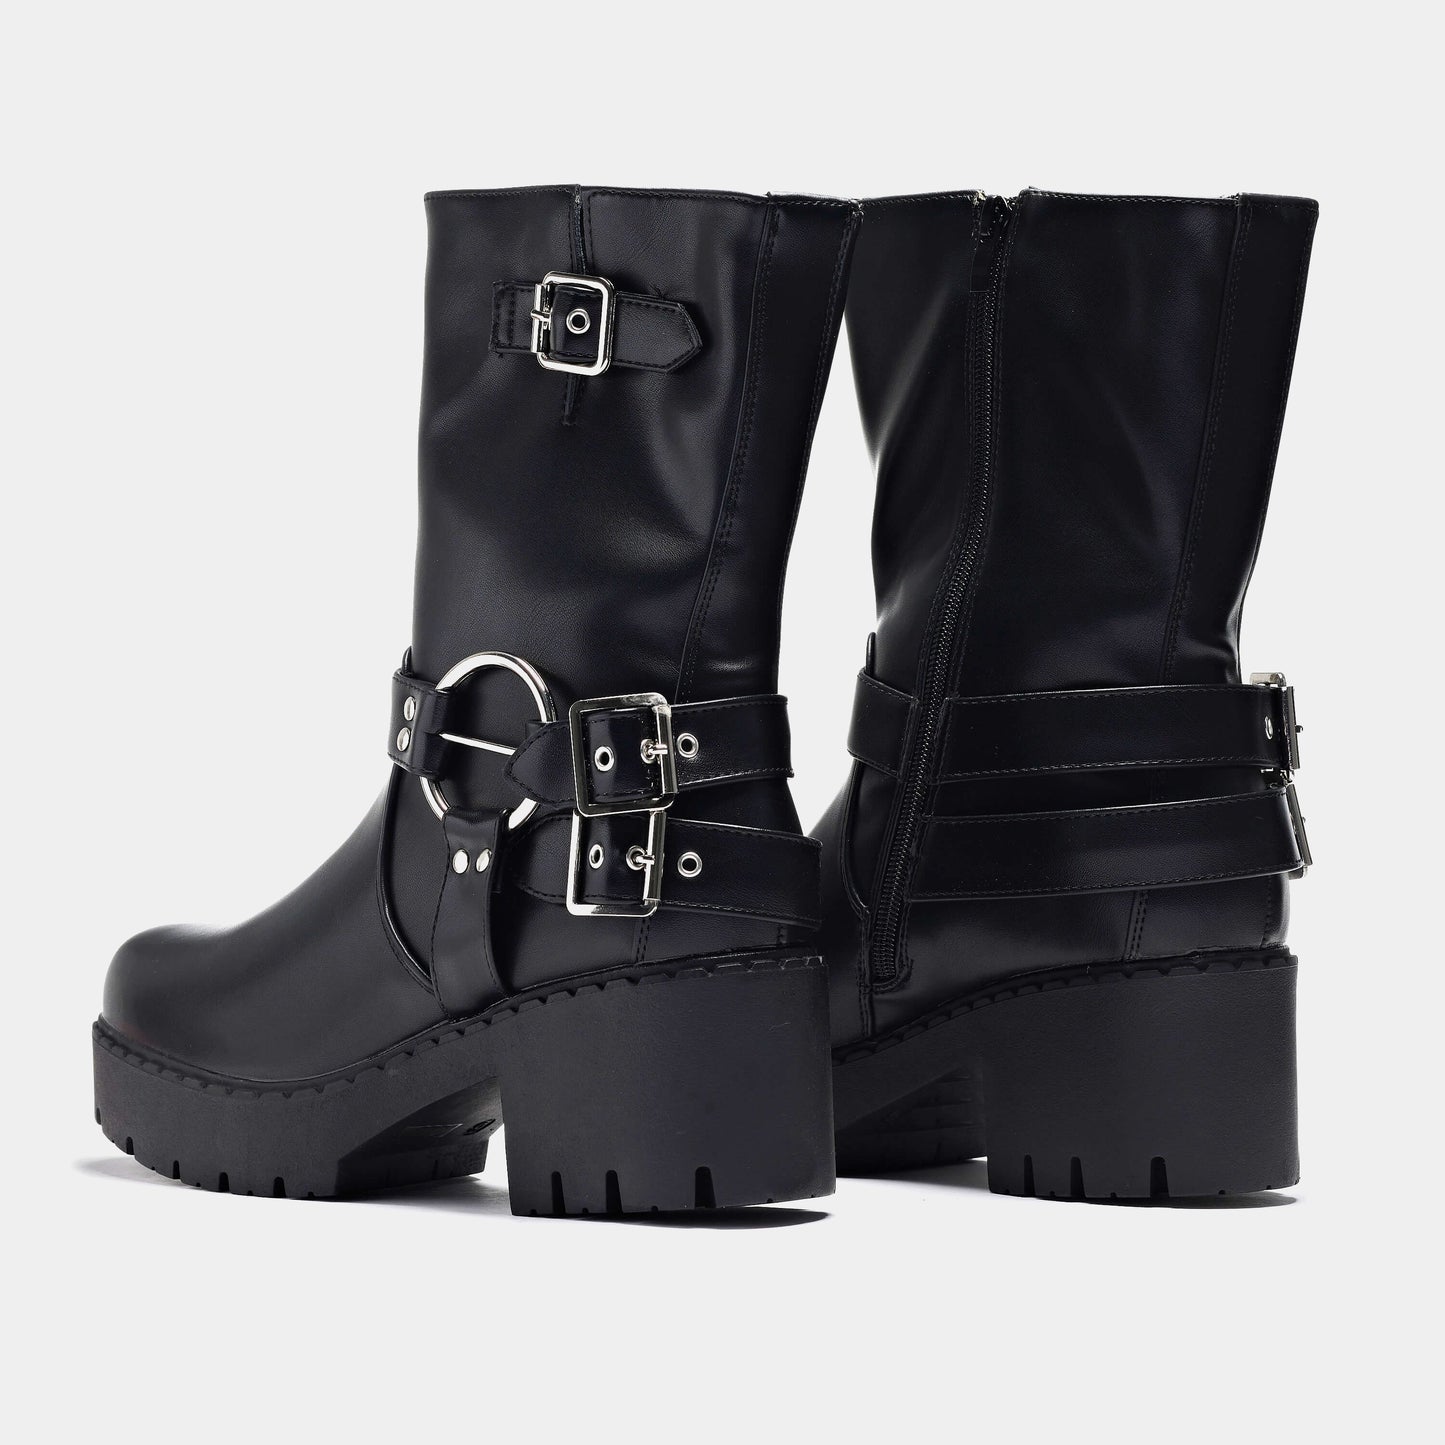 Oblivion Grunge Switch Boots - Ankle Boots - KOI Footwear - Black - Back View